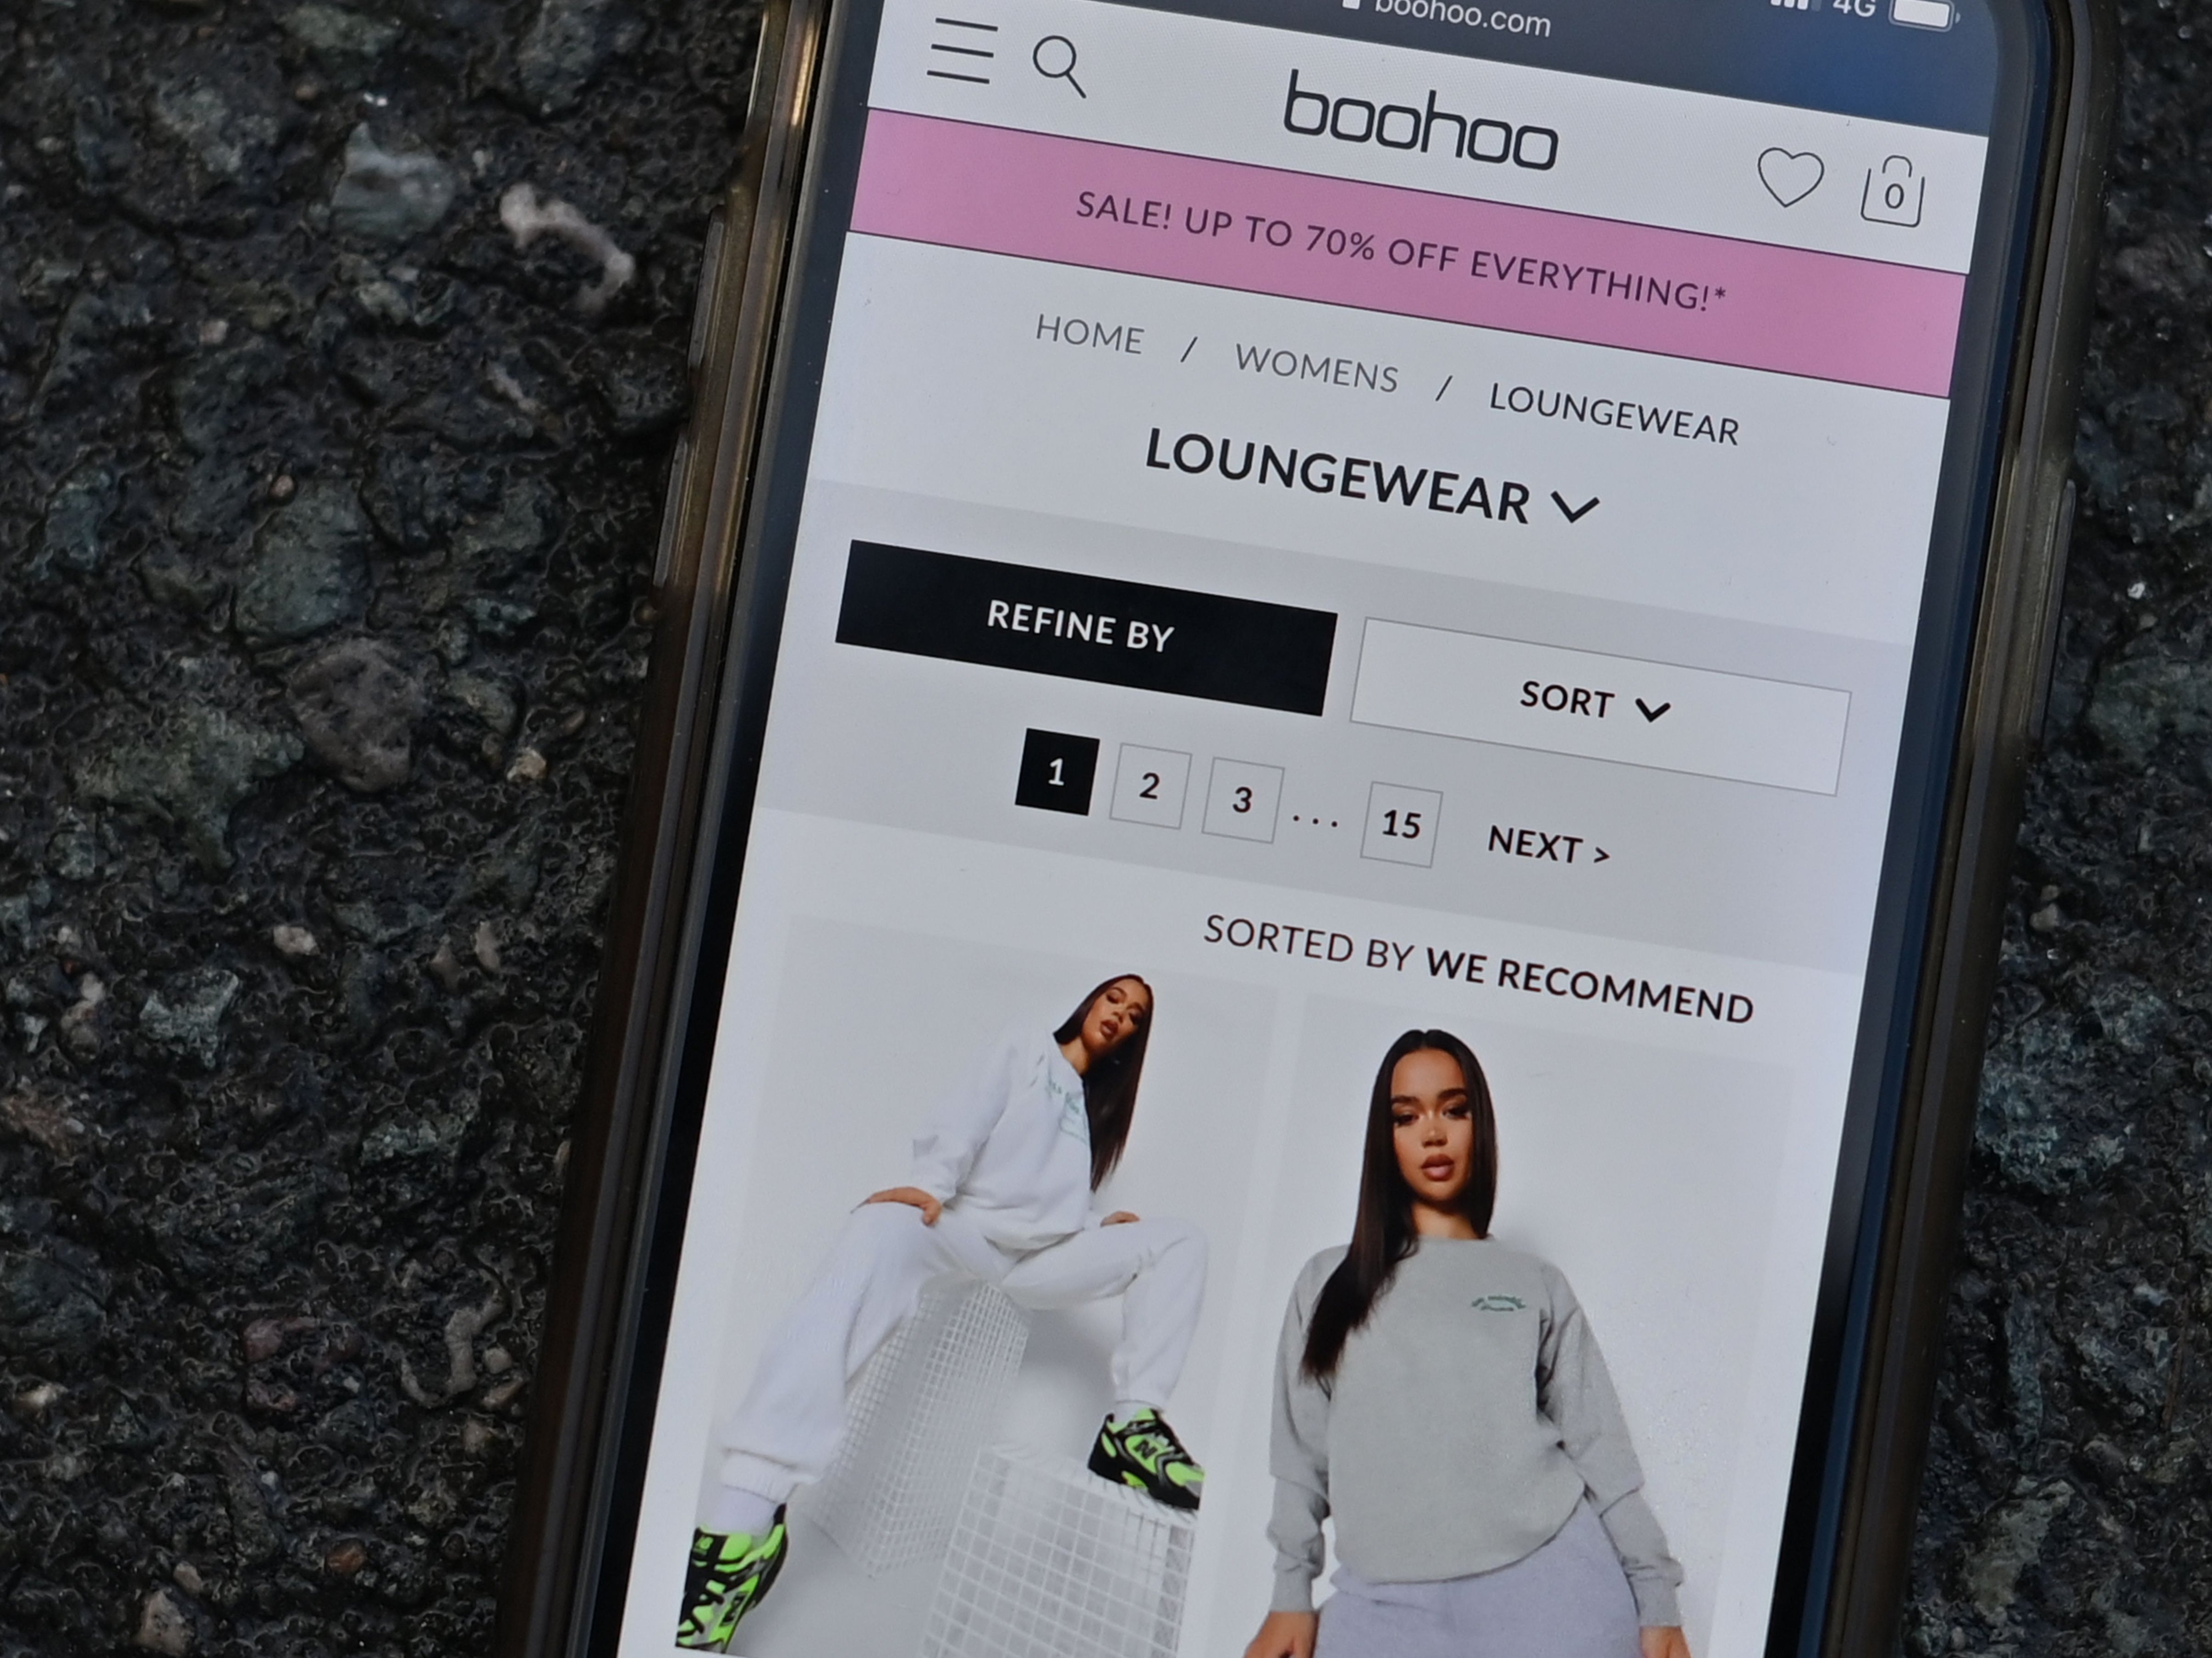 Boohoo’s website on a mobile phone